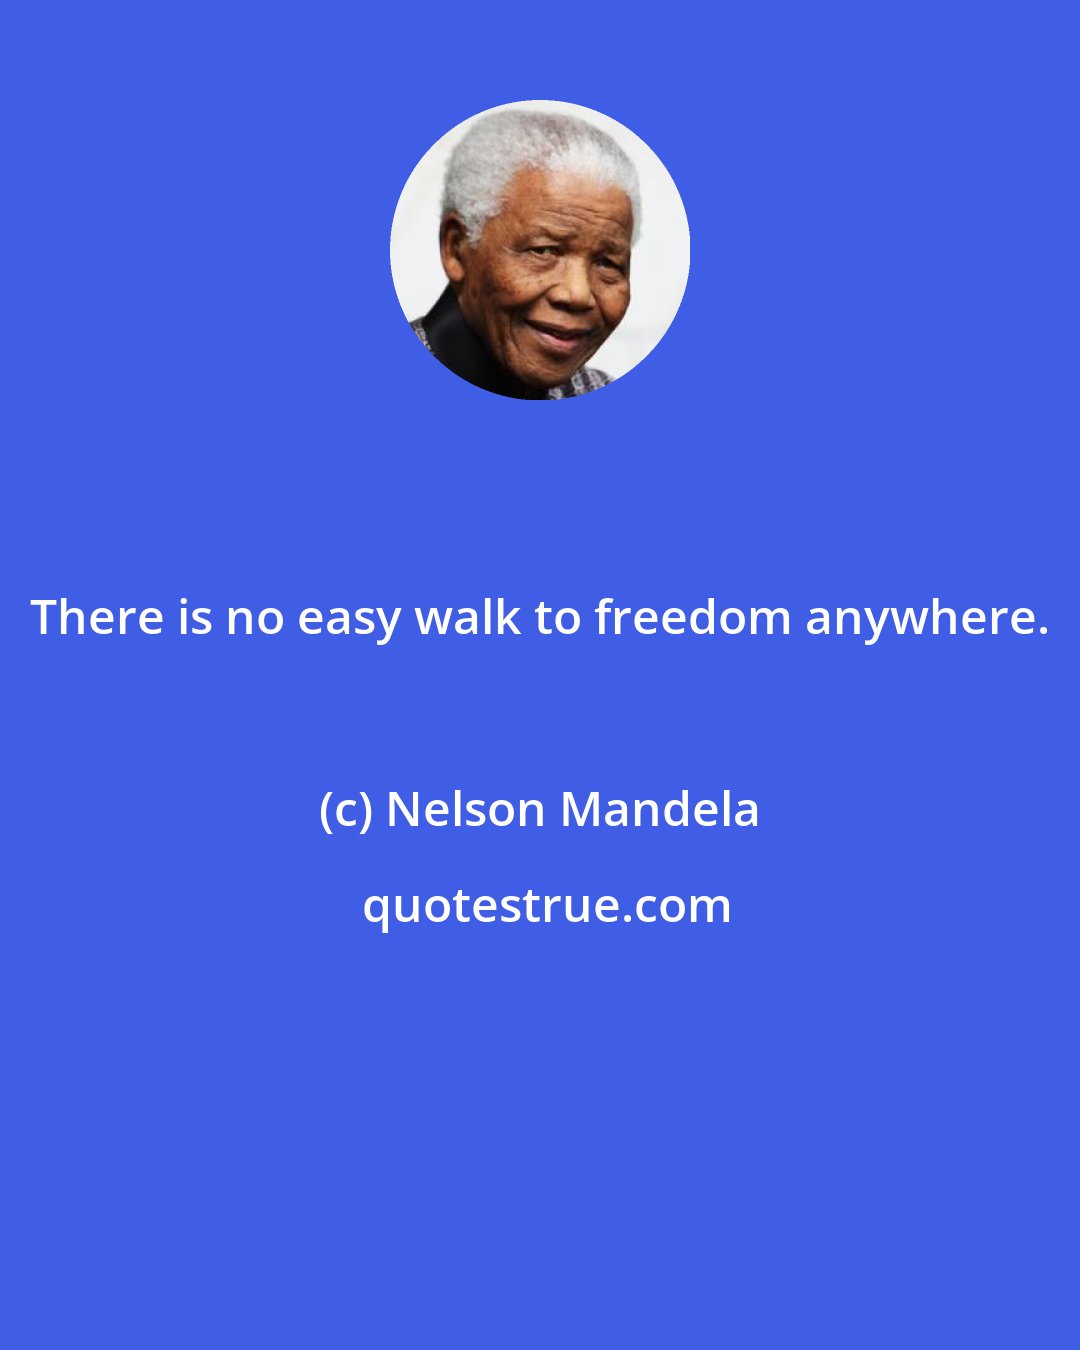 Nelson Mandela: There is no easy walk to freedom anywhere.